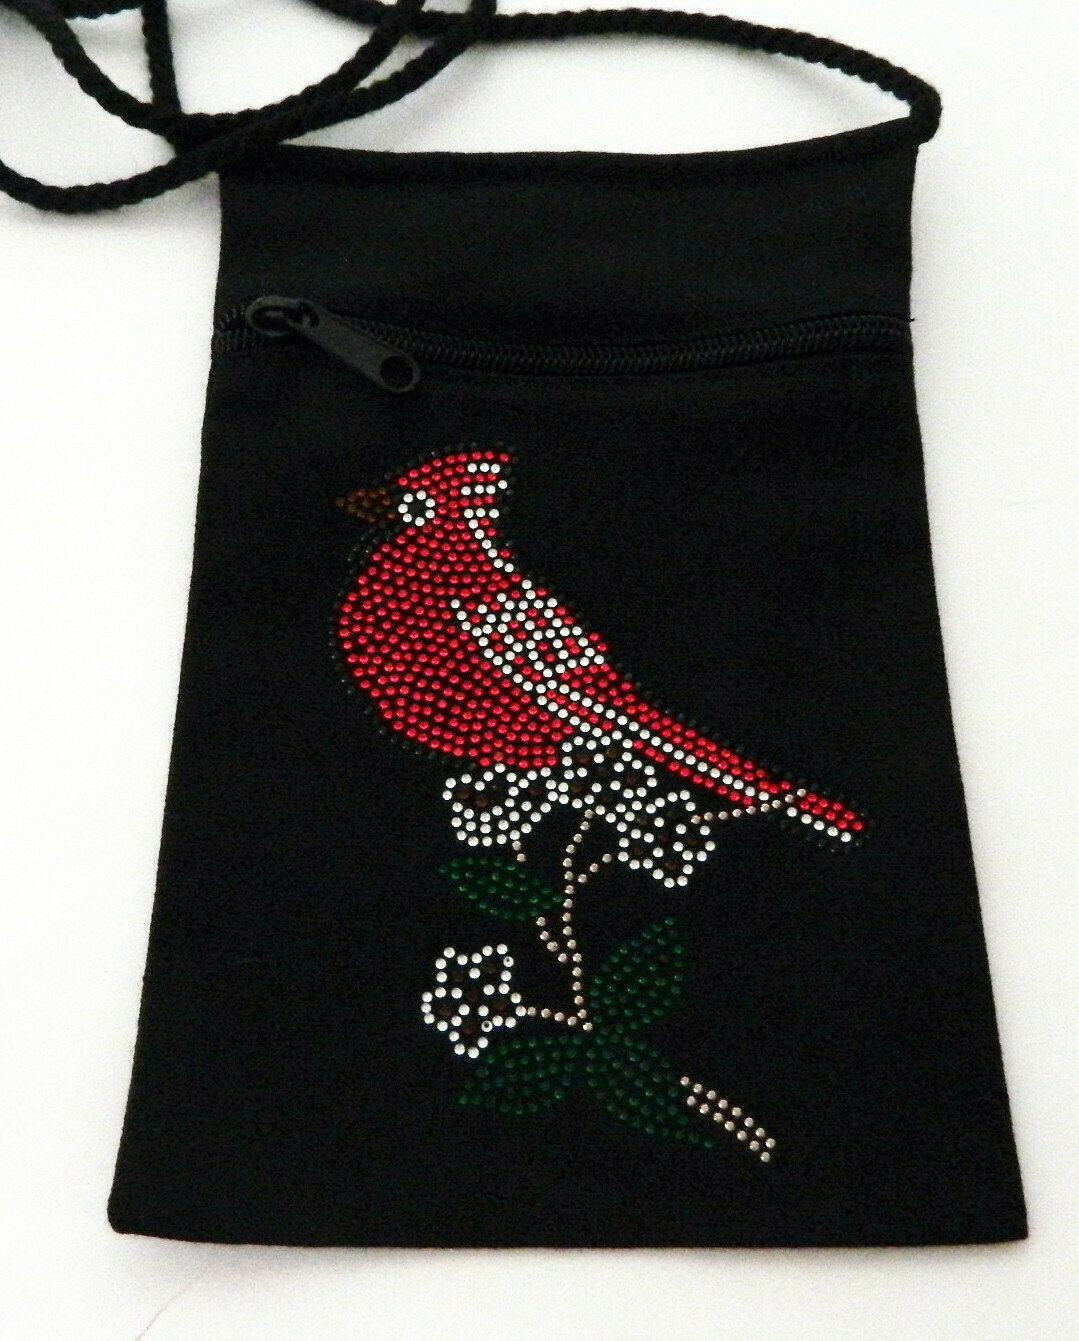 CARDINAL
Zipperd Embellished Pouch -Black only